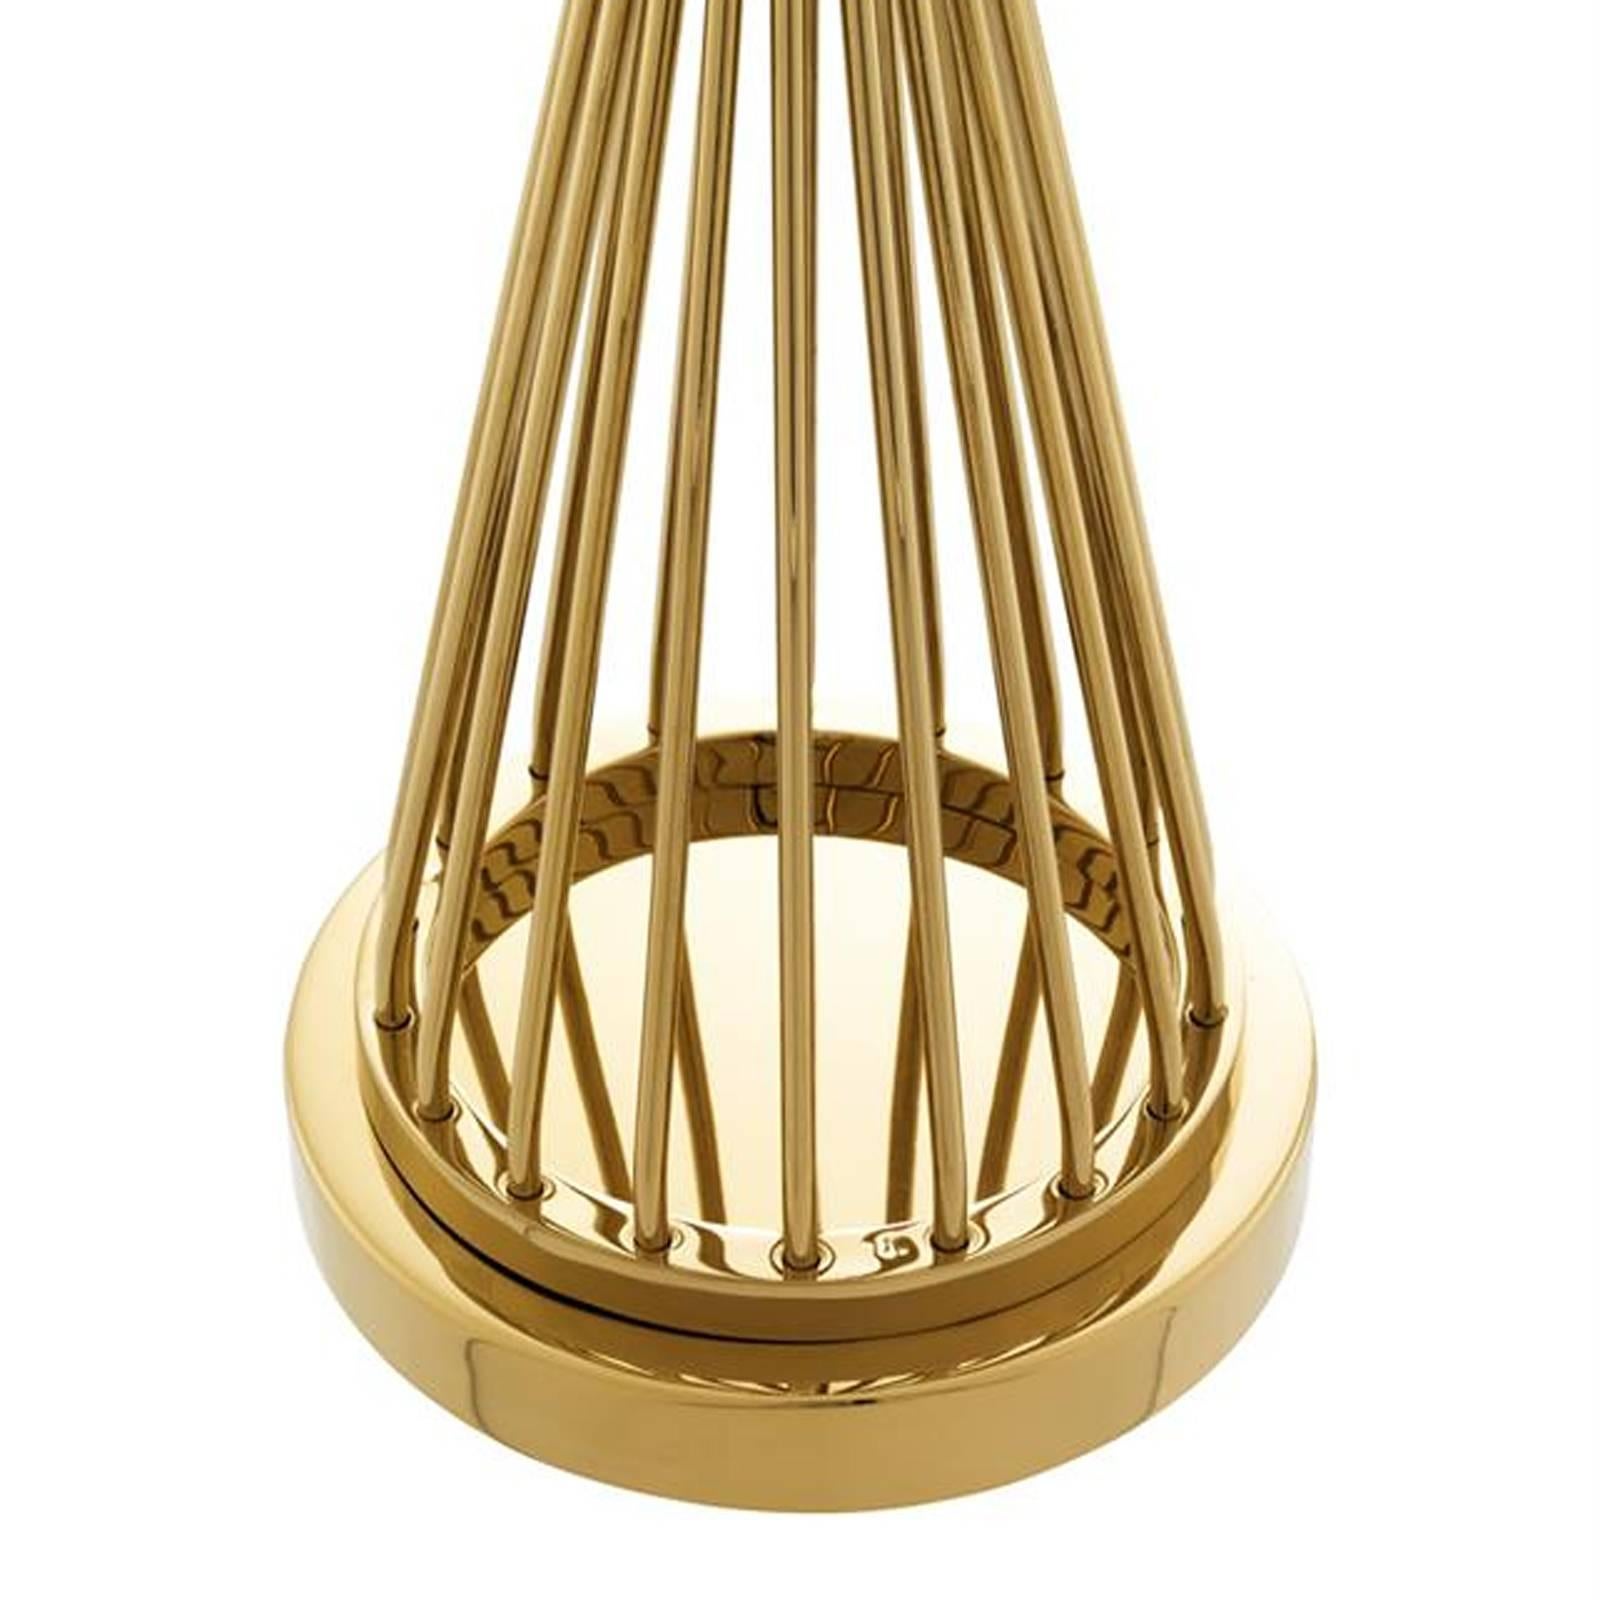 Contemporary Barnet Table Lamp in Gold or Nickel Finish